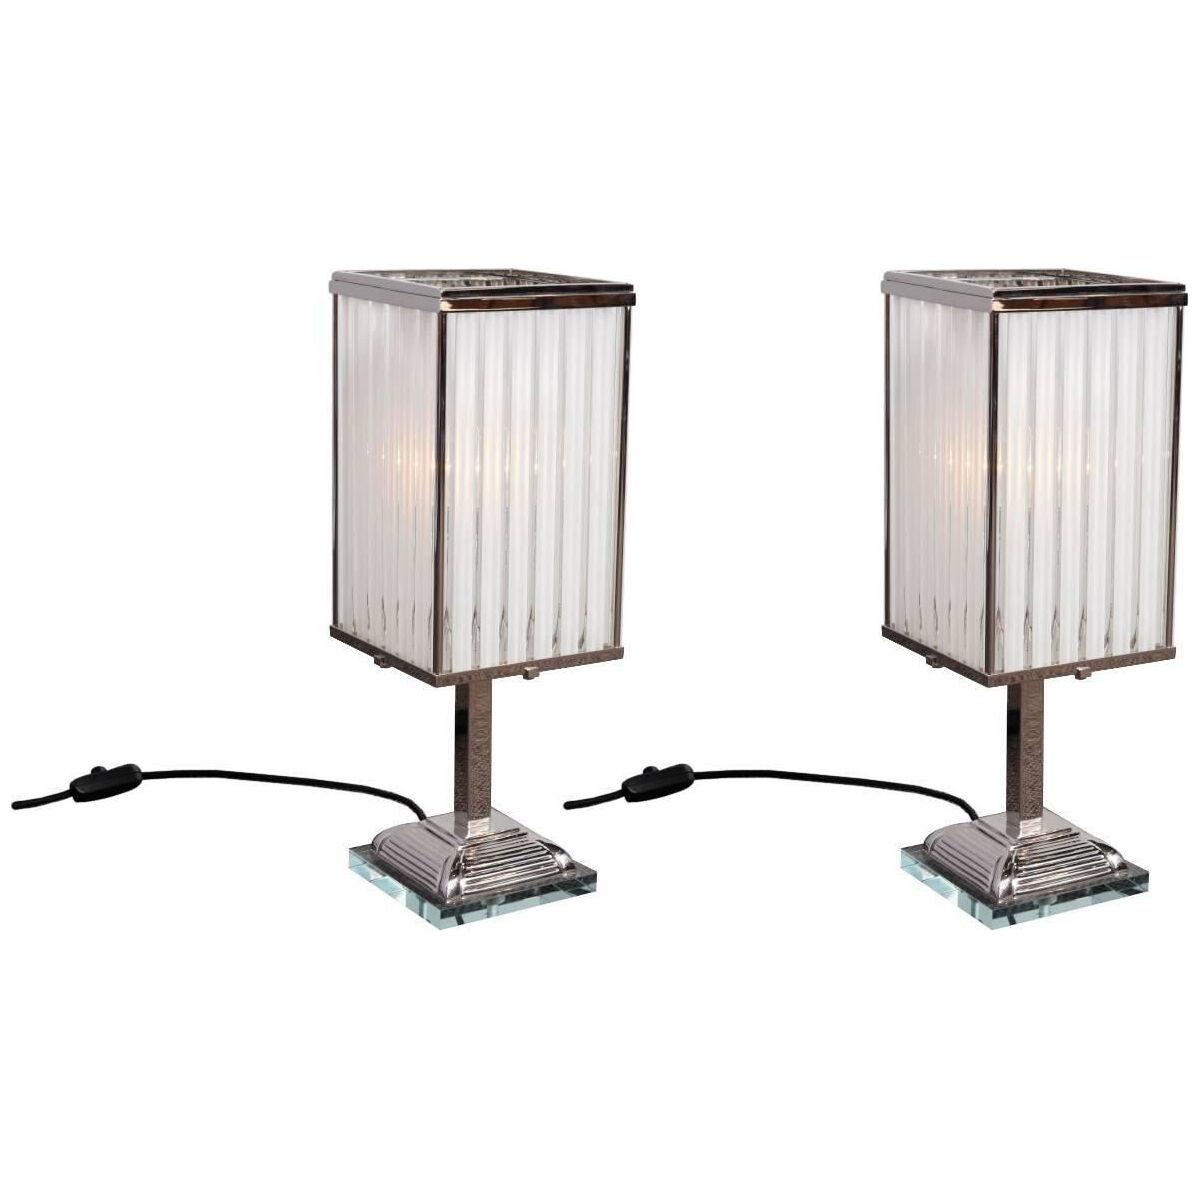 Pair of Art Deco modernist Lamps in nickel plated metal and glass